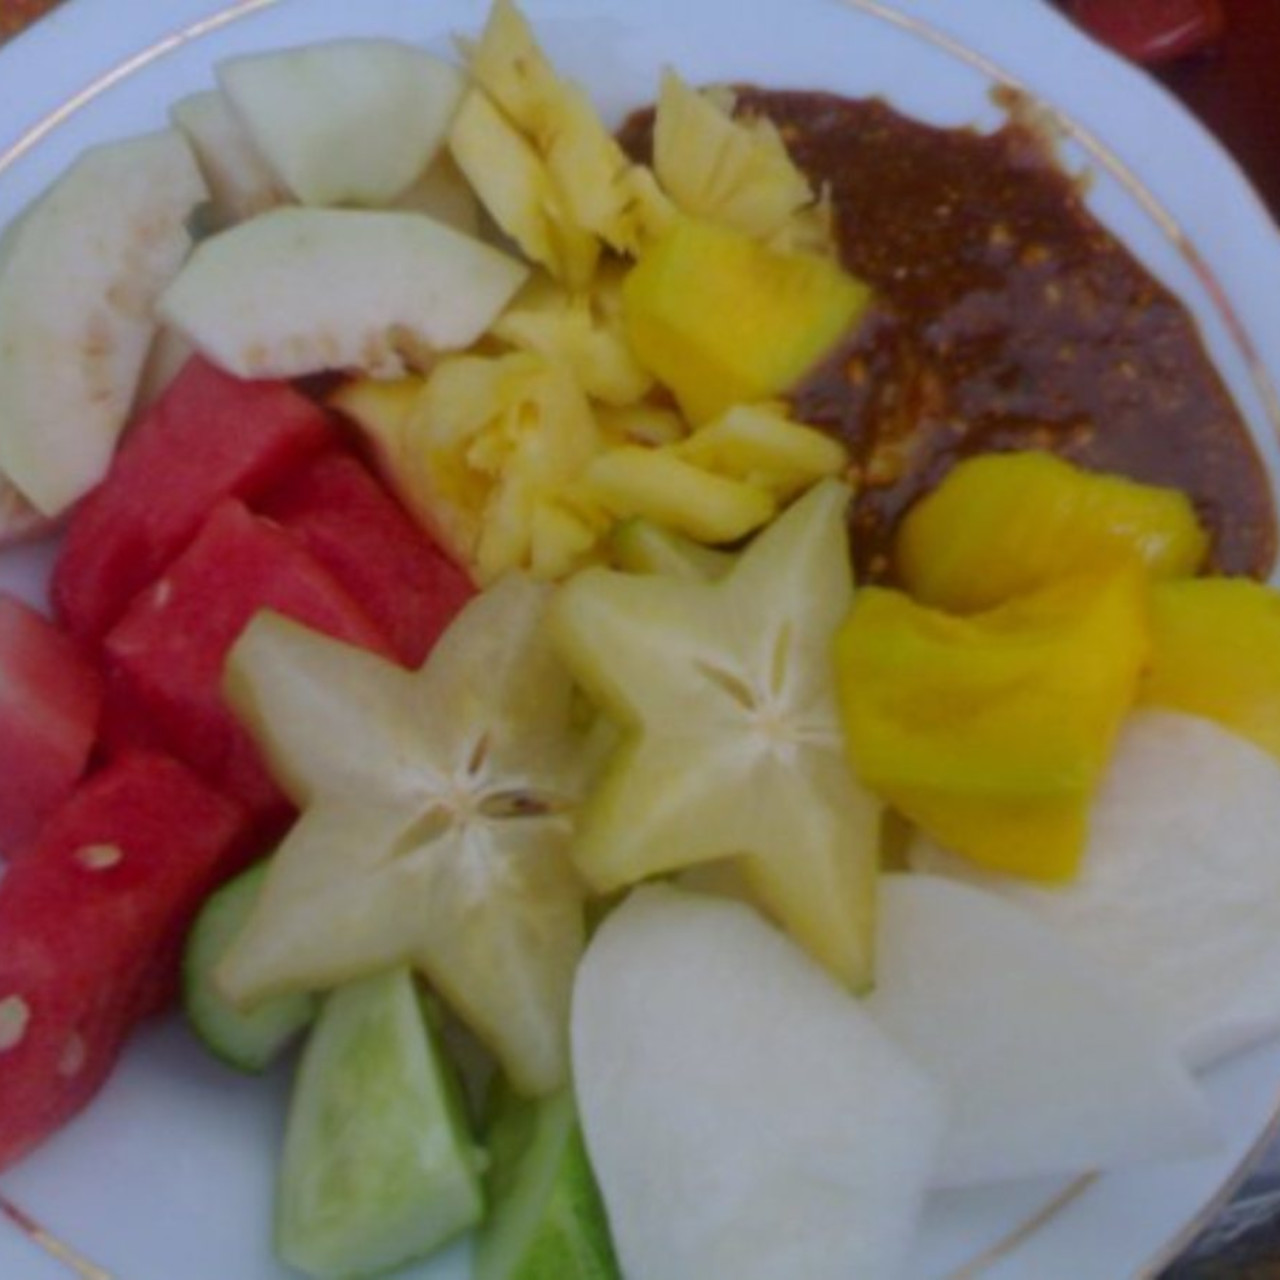 Photo Rujak Buah - Fruit Salad with Spicy Palm Sugar Sauce from Palembang City